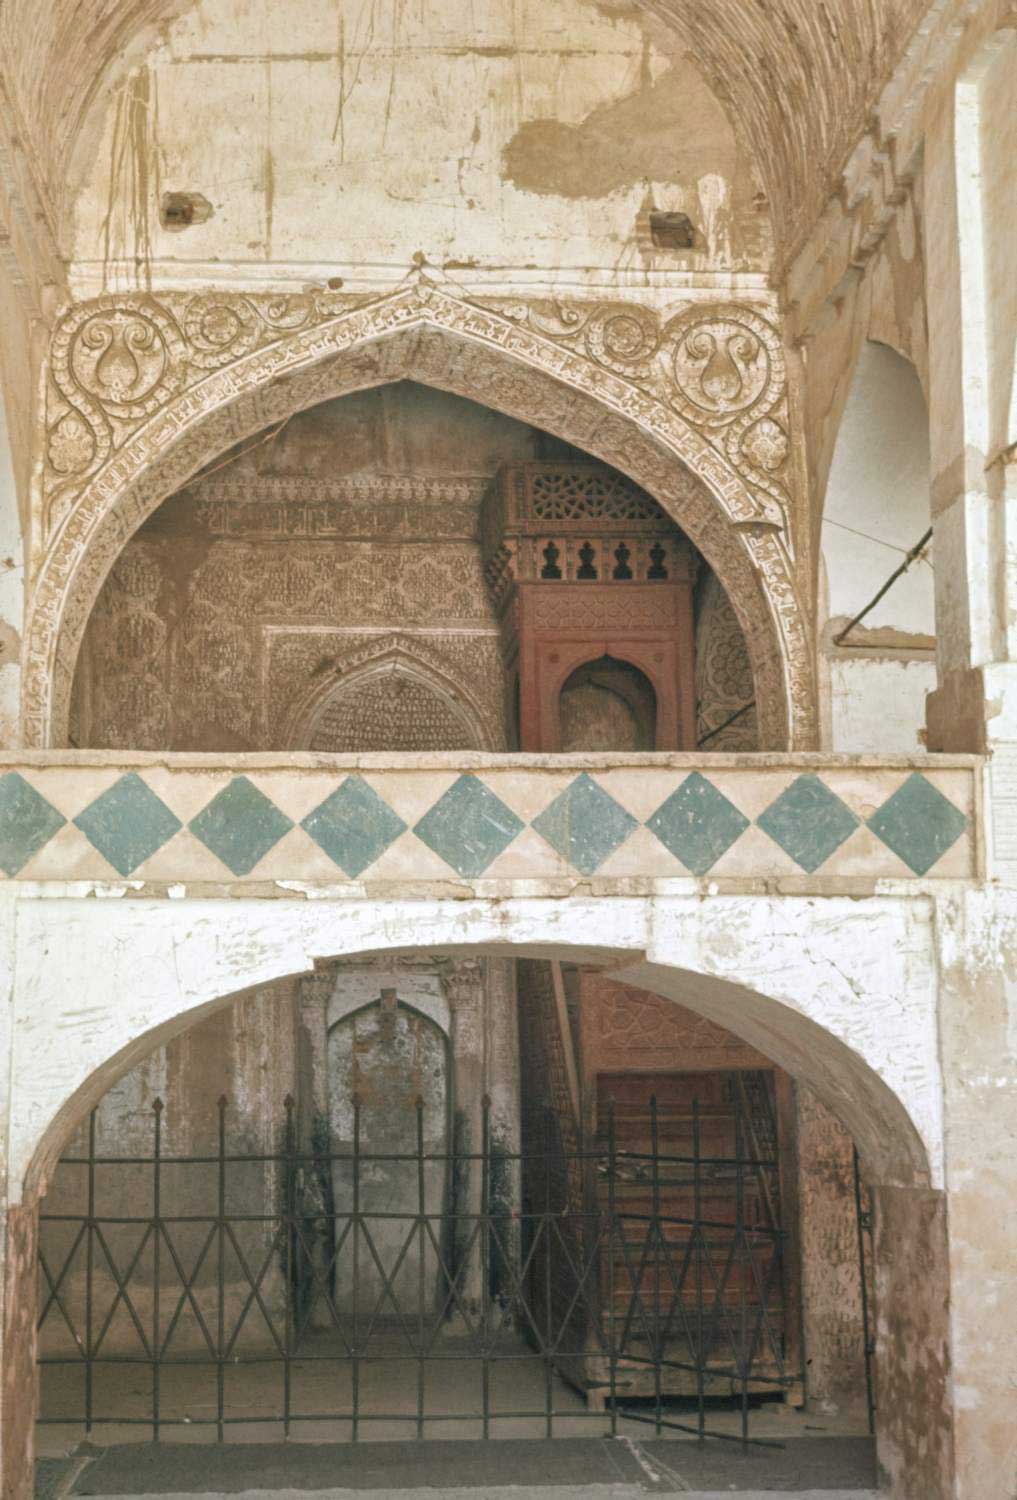 Interior view from the prayer hall with minbar and qibla wall